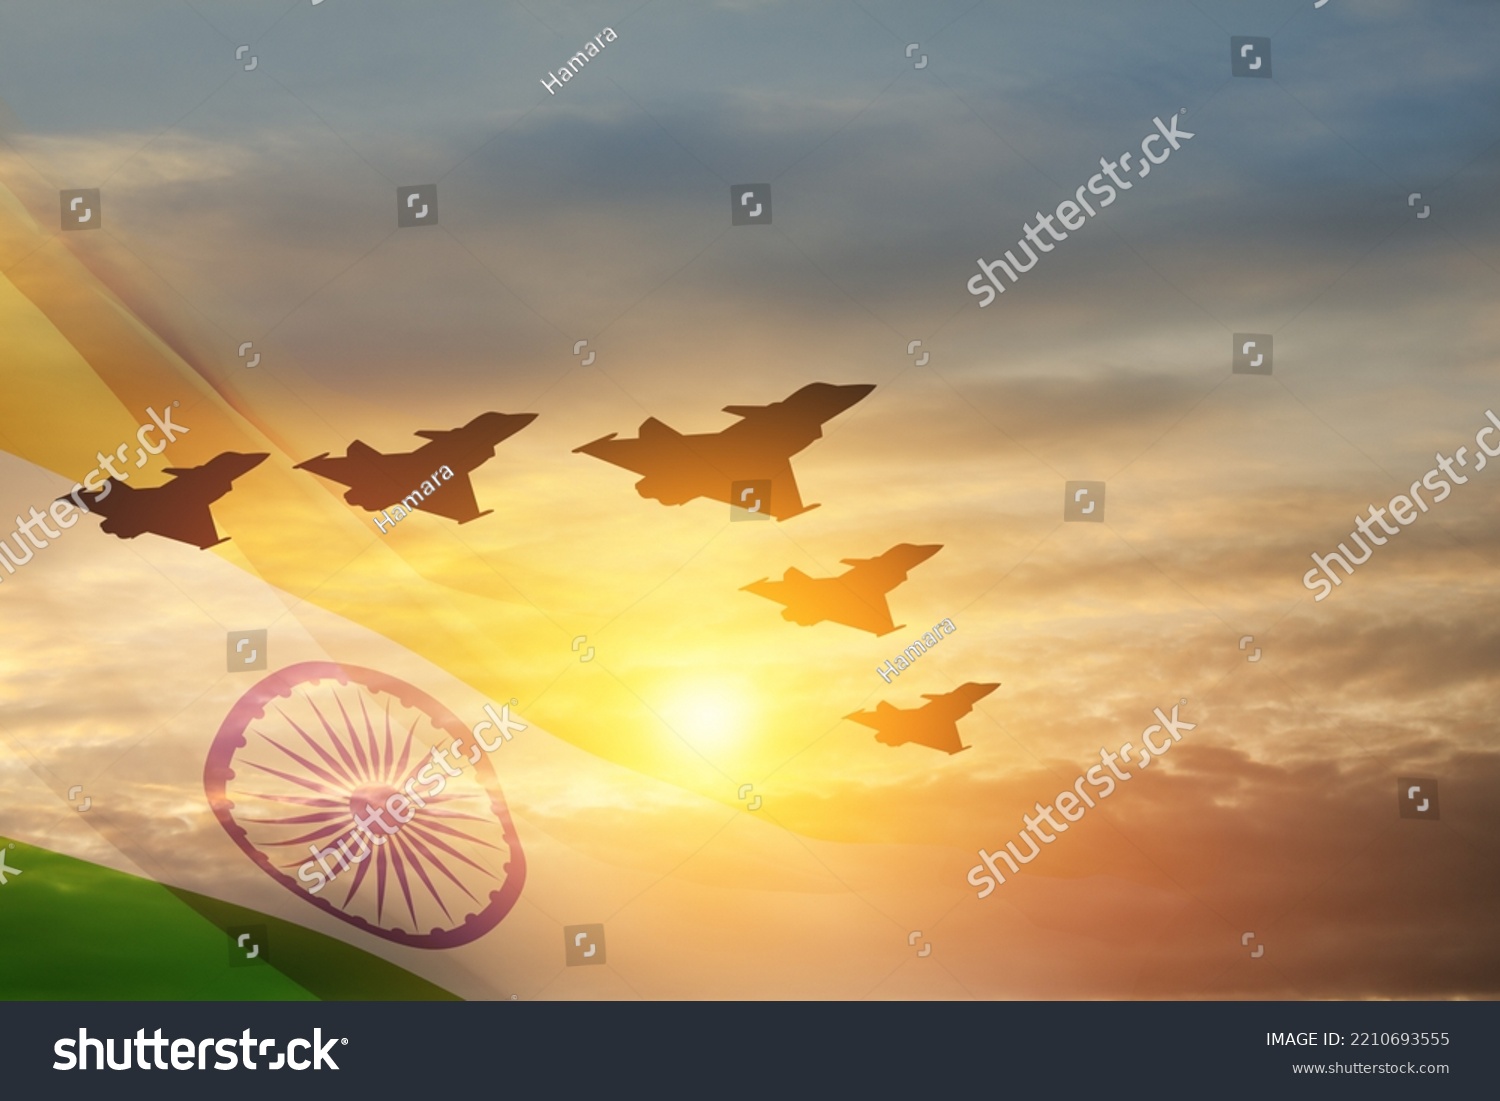 Indian Air Force Day. Indian jet air shows on background of sunset with transparent Indian flag. Commemorate Indian Air Force Day on October 8 in India. #2210693555